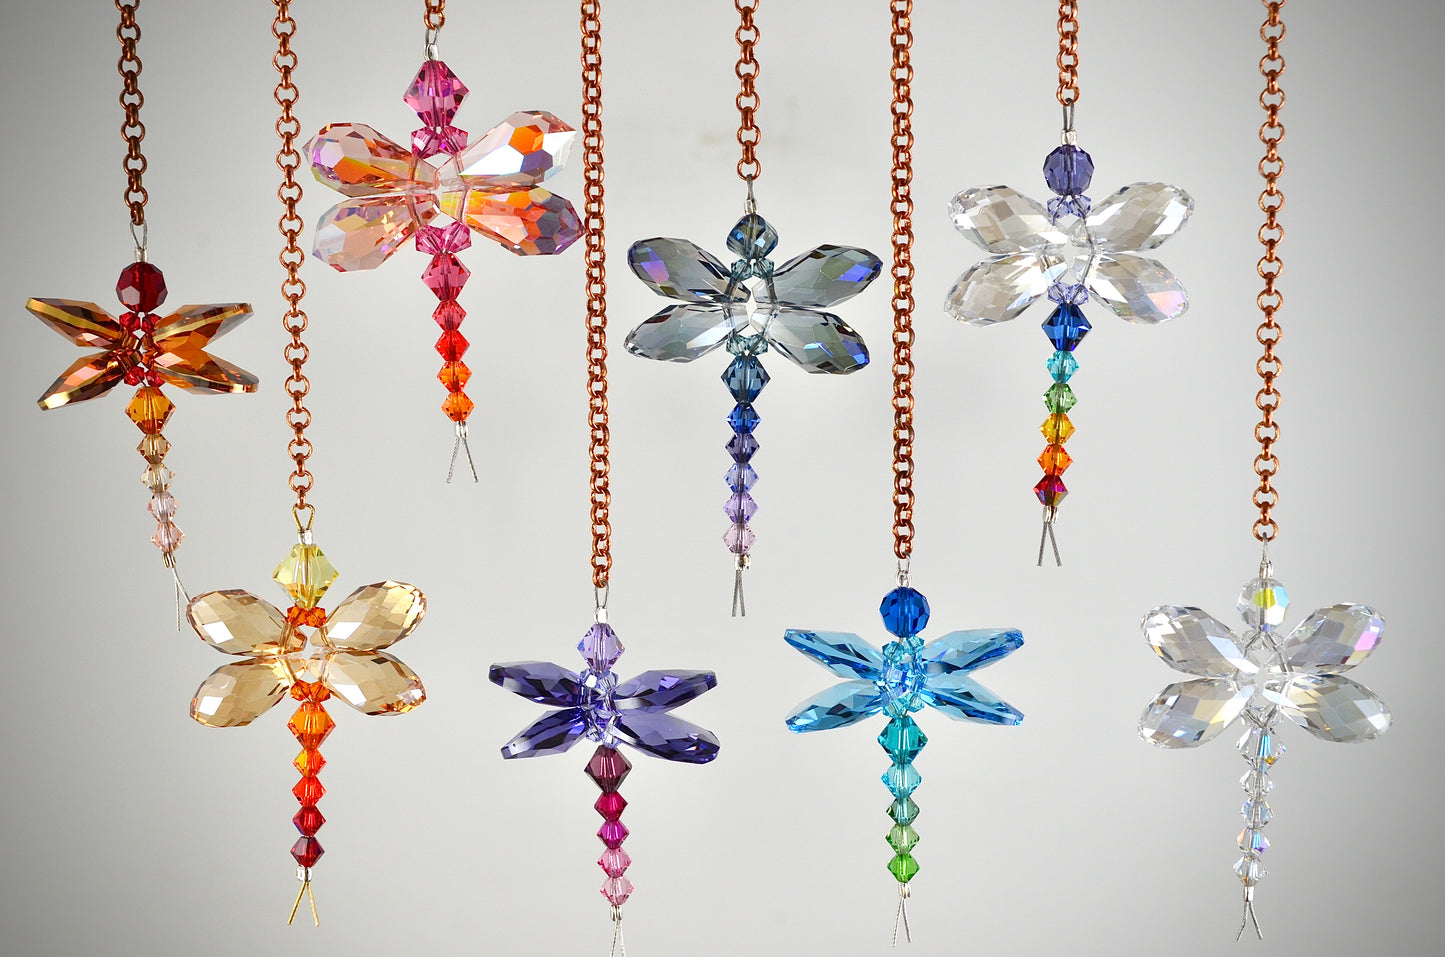 Tiny Dragonfly rear view mirror car charms: Rainbow Suncatchers made from Crystal Prisms